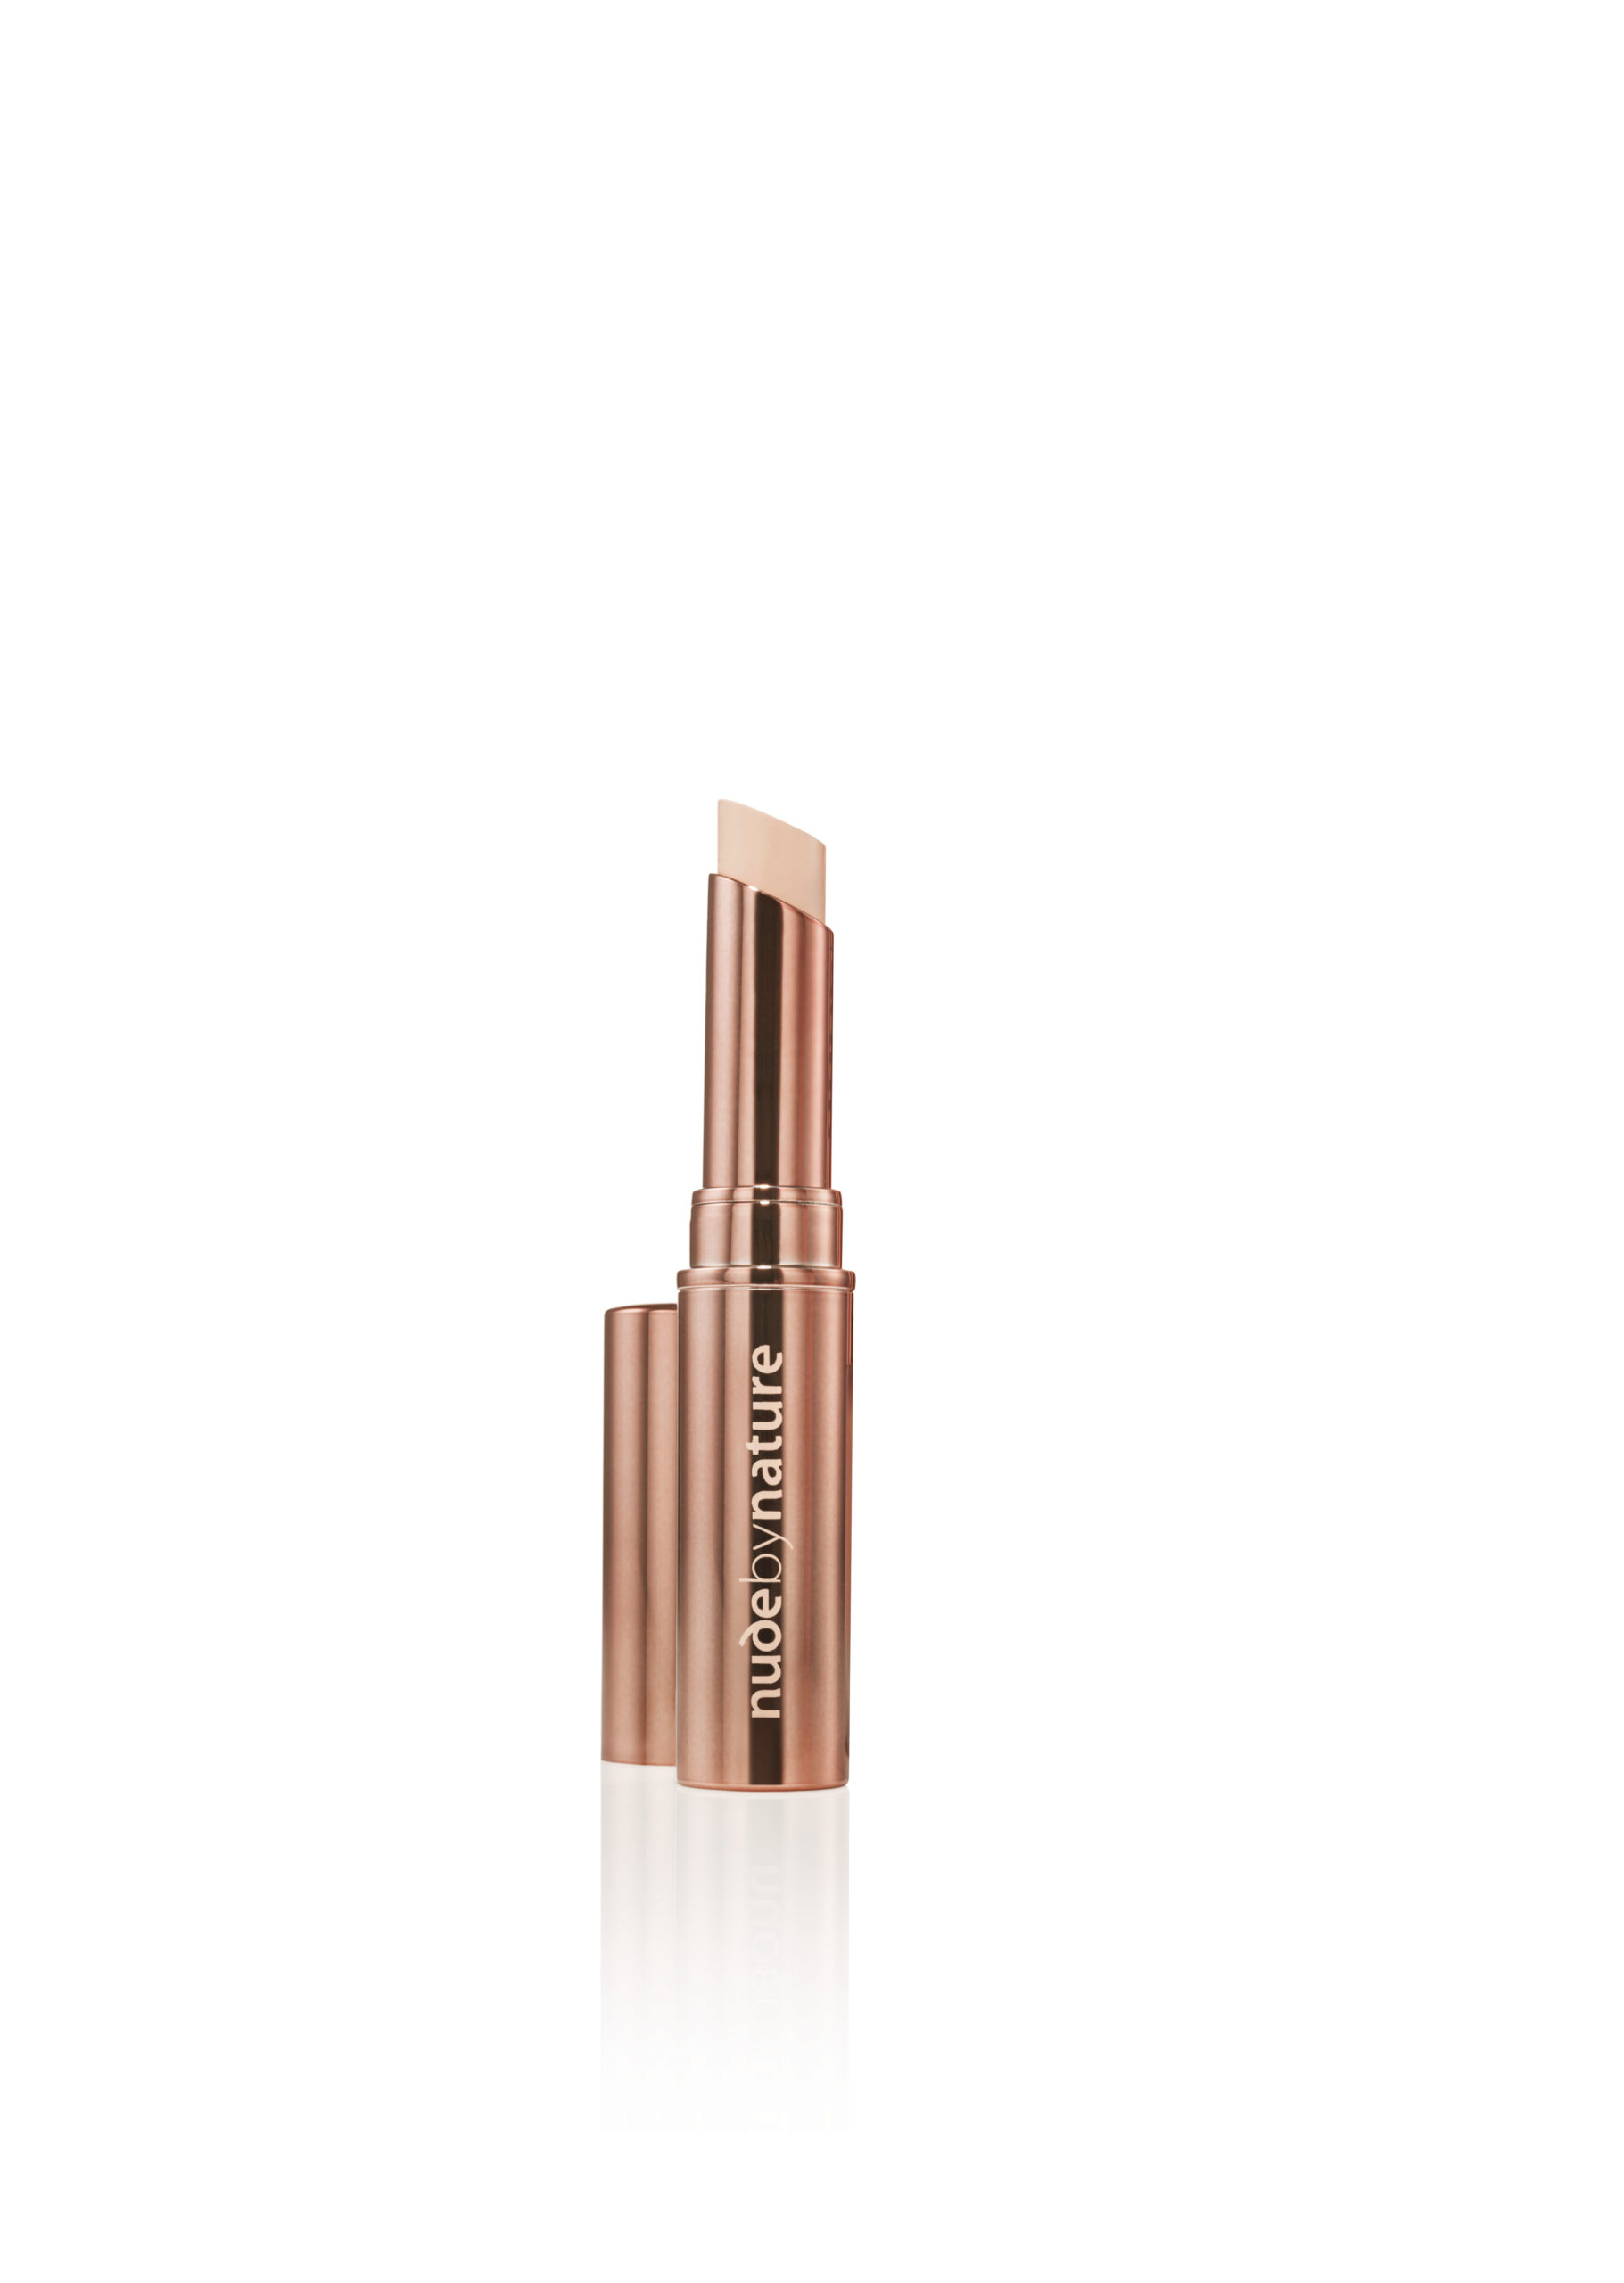 Nude by Nature – Flawless Concealer